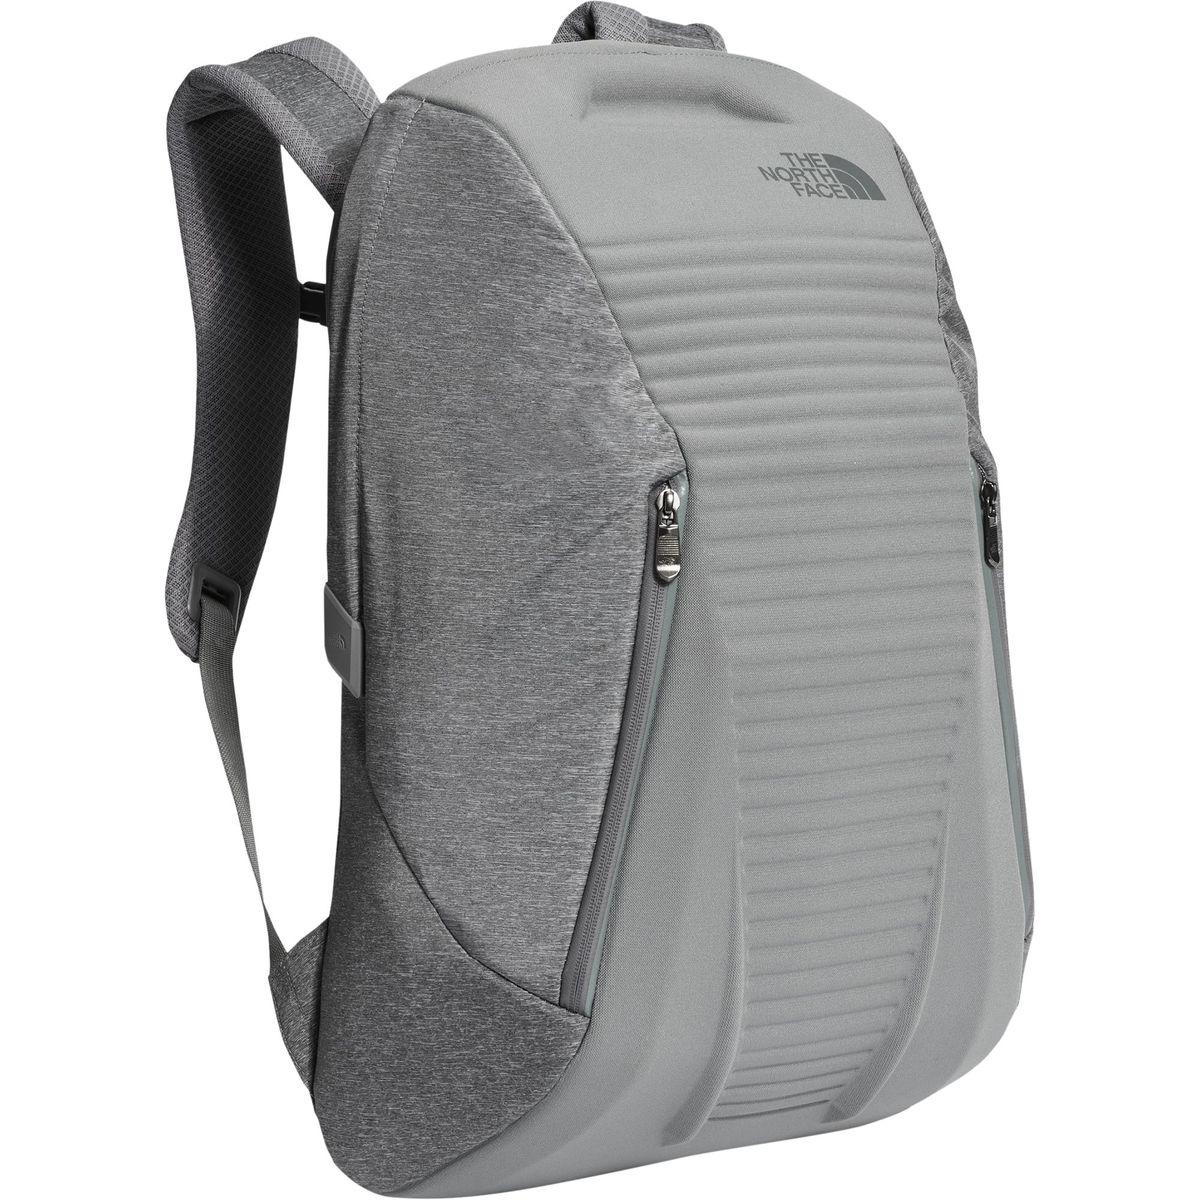 The North Face Fleece Access 22l Backpack in Gray for Men - Lyst